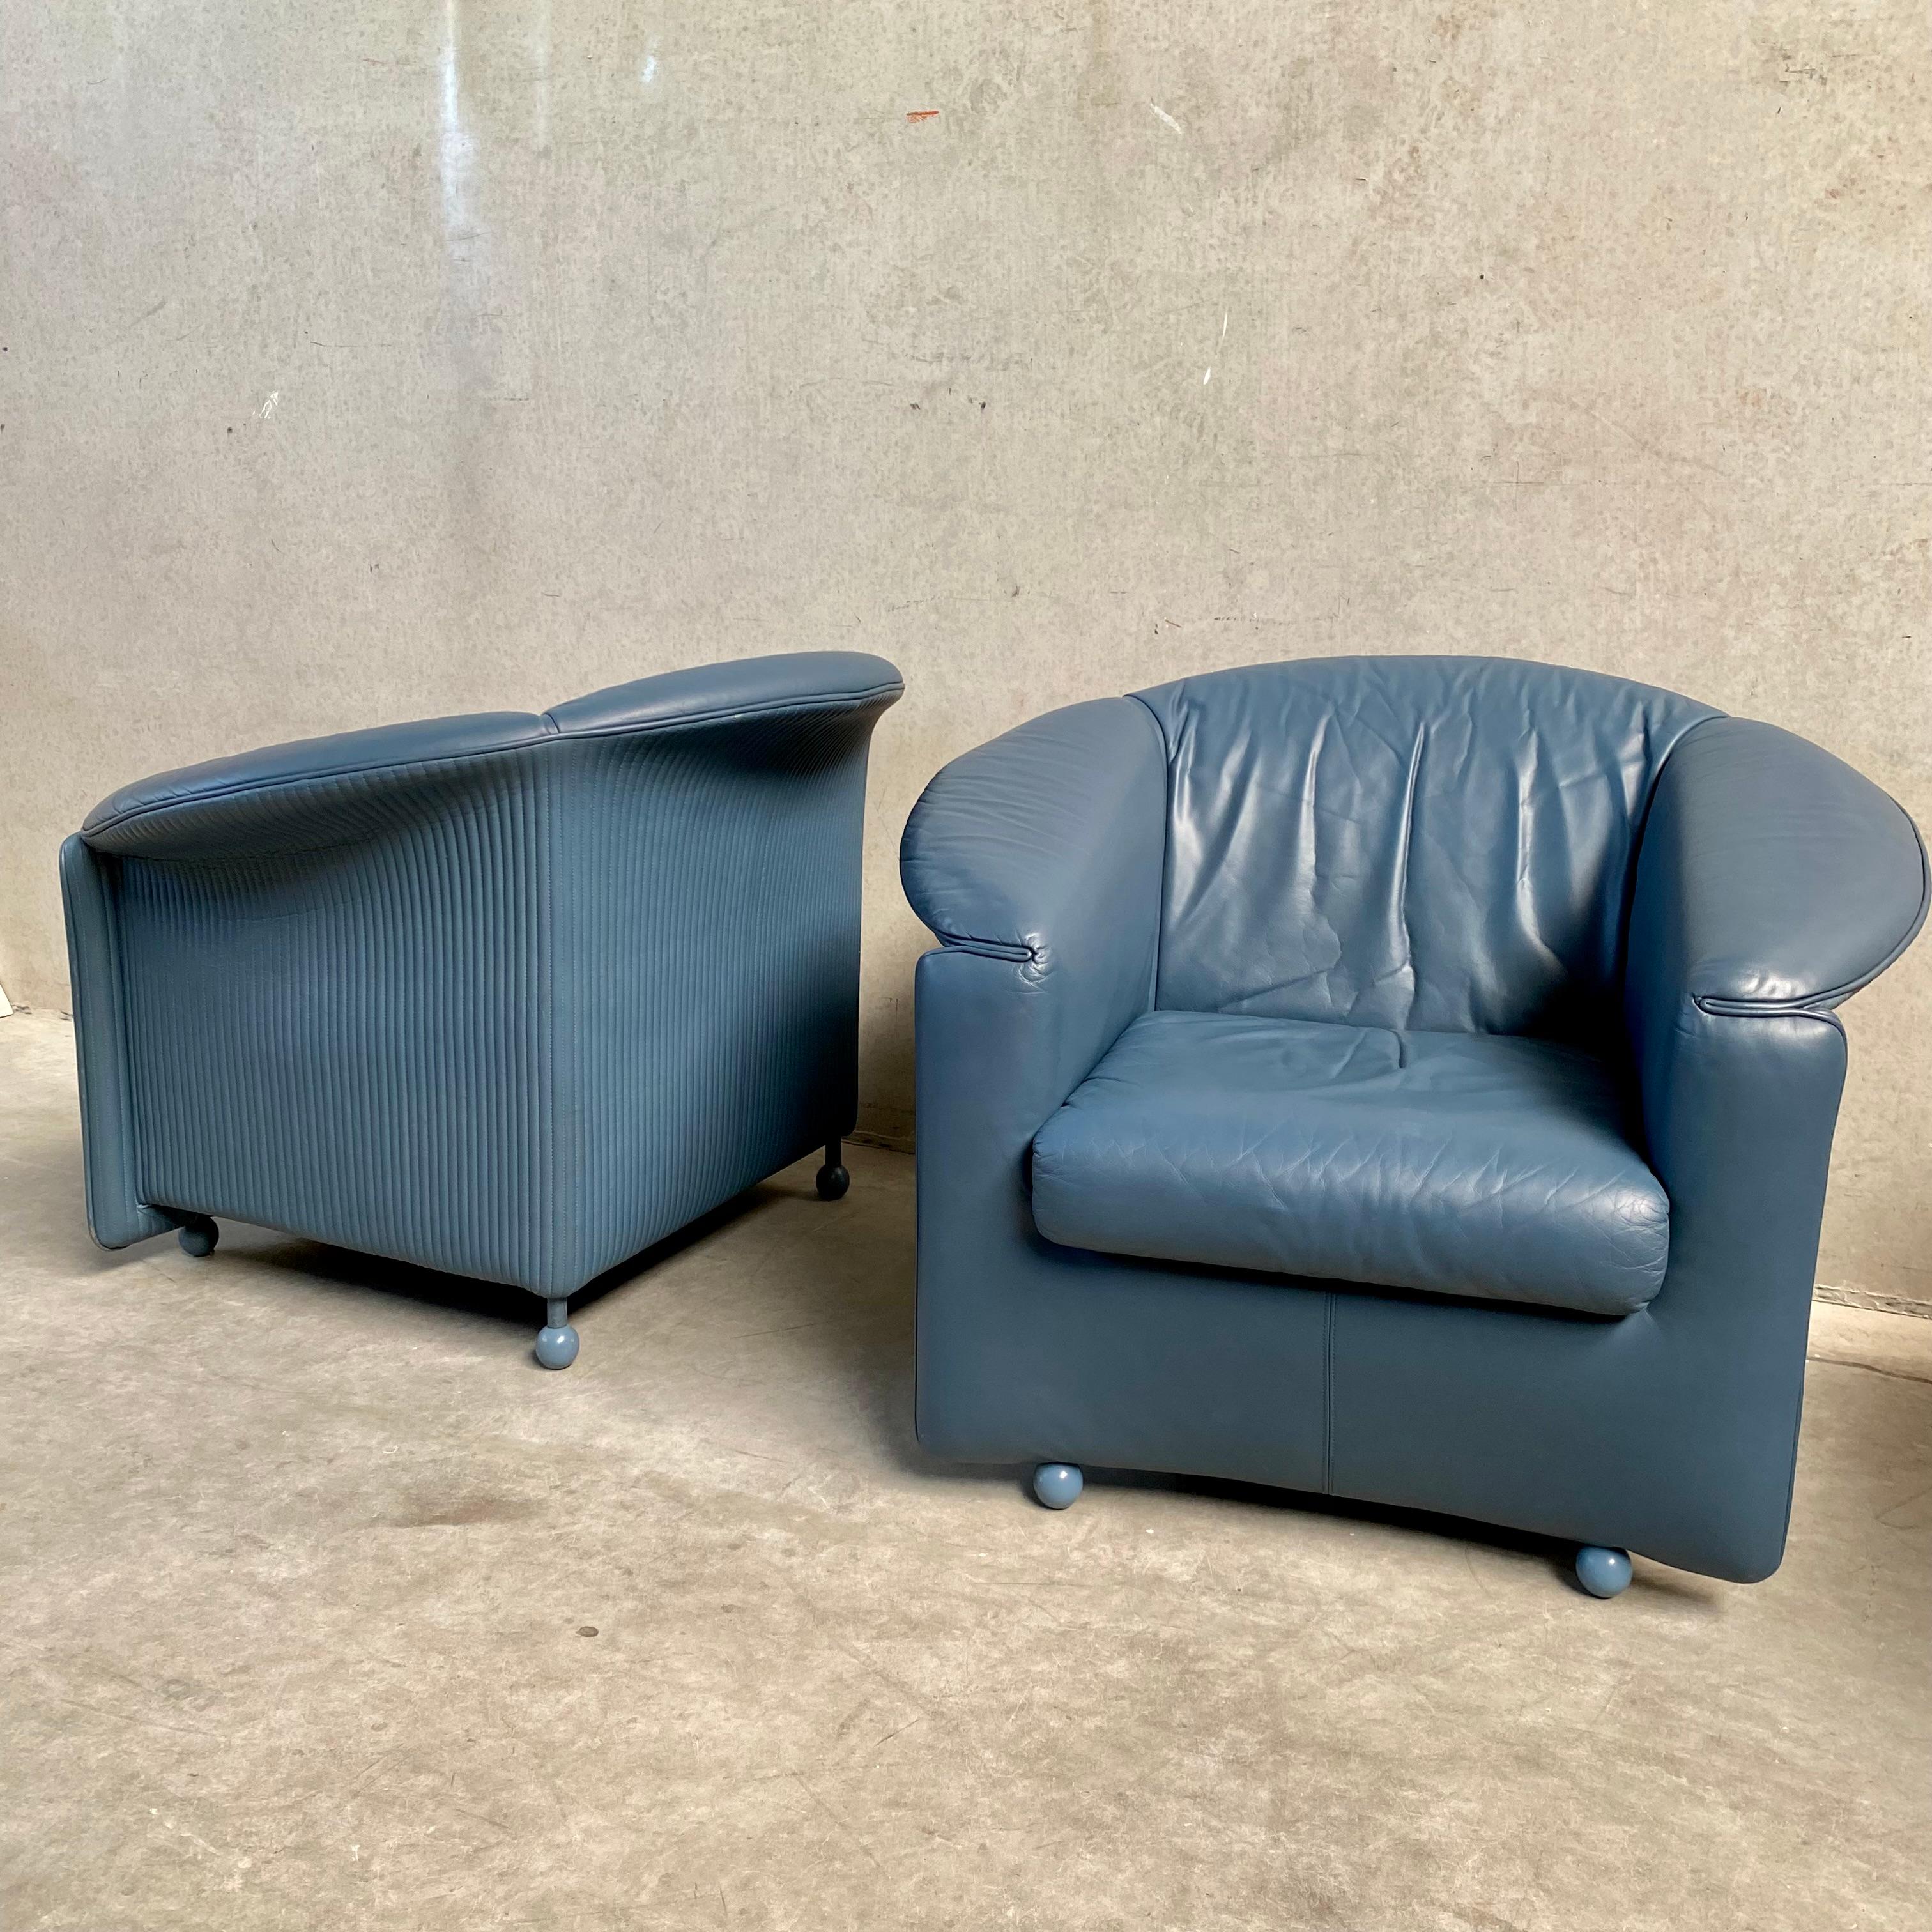 Set of 2 Vintage Leather Arm Chairs by Paolo Piva for Wittmann, Austria 1980s For Sale 11